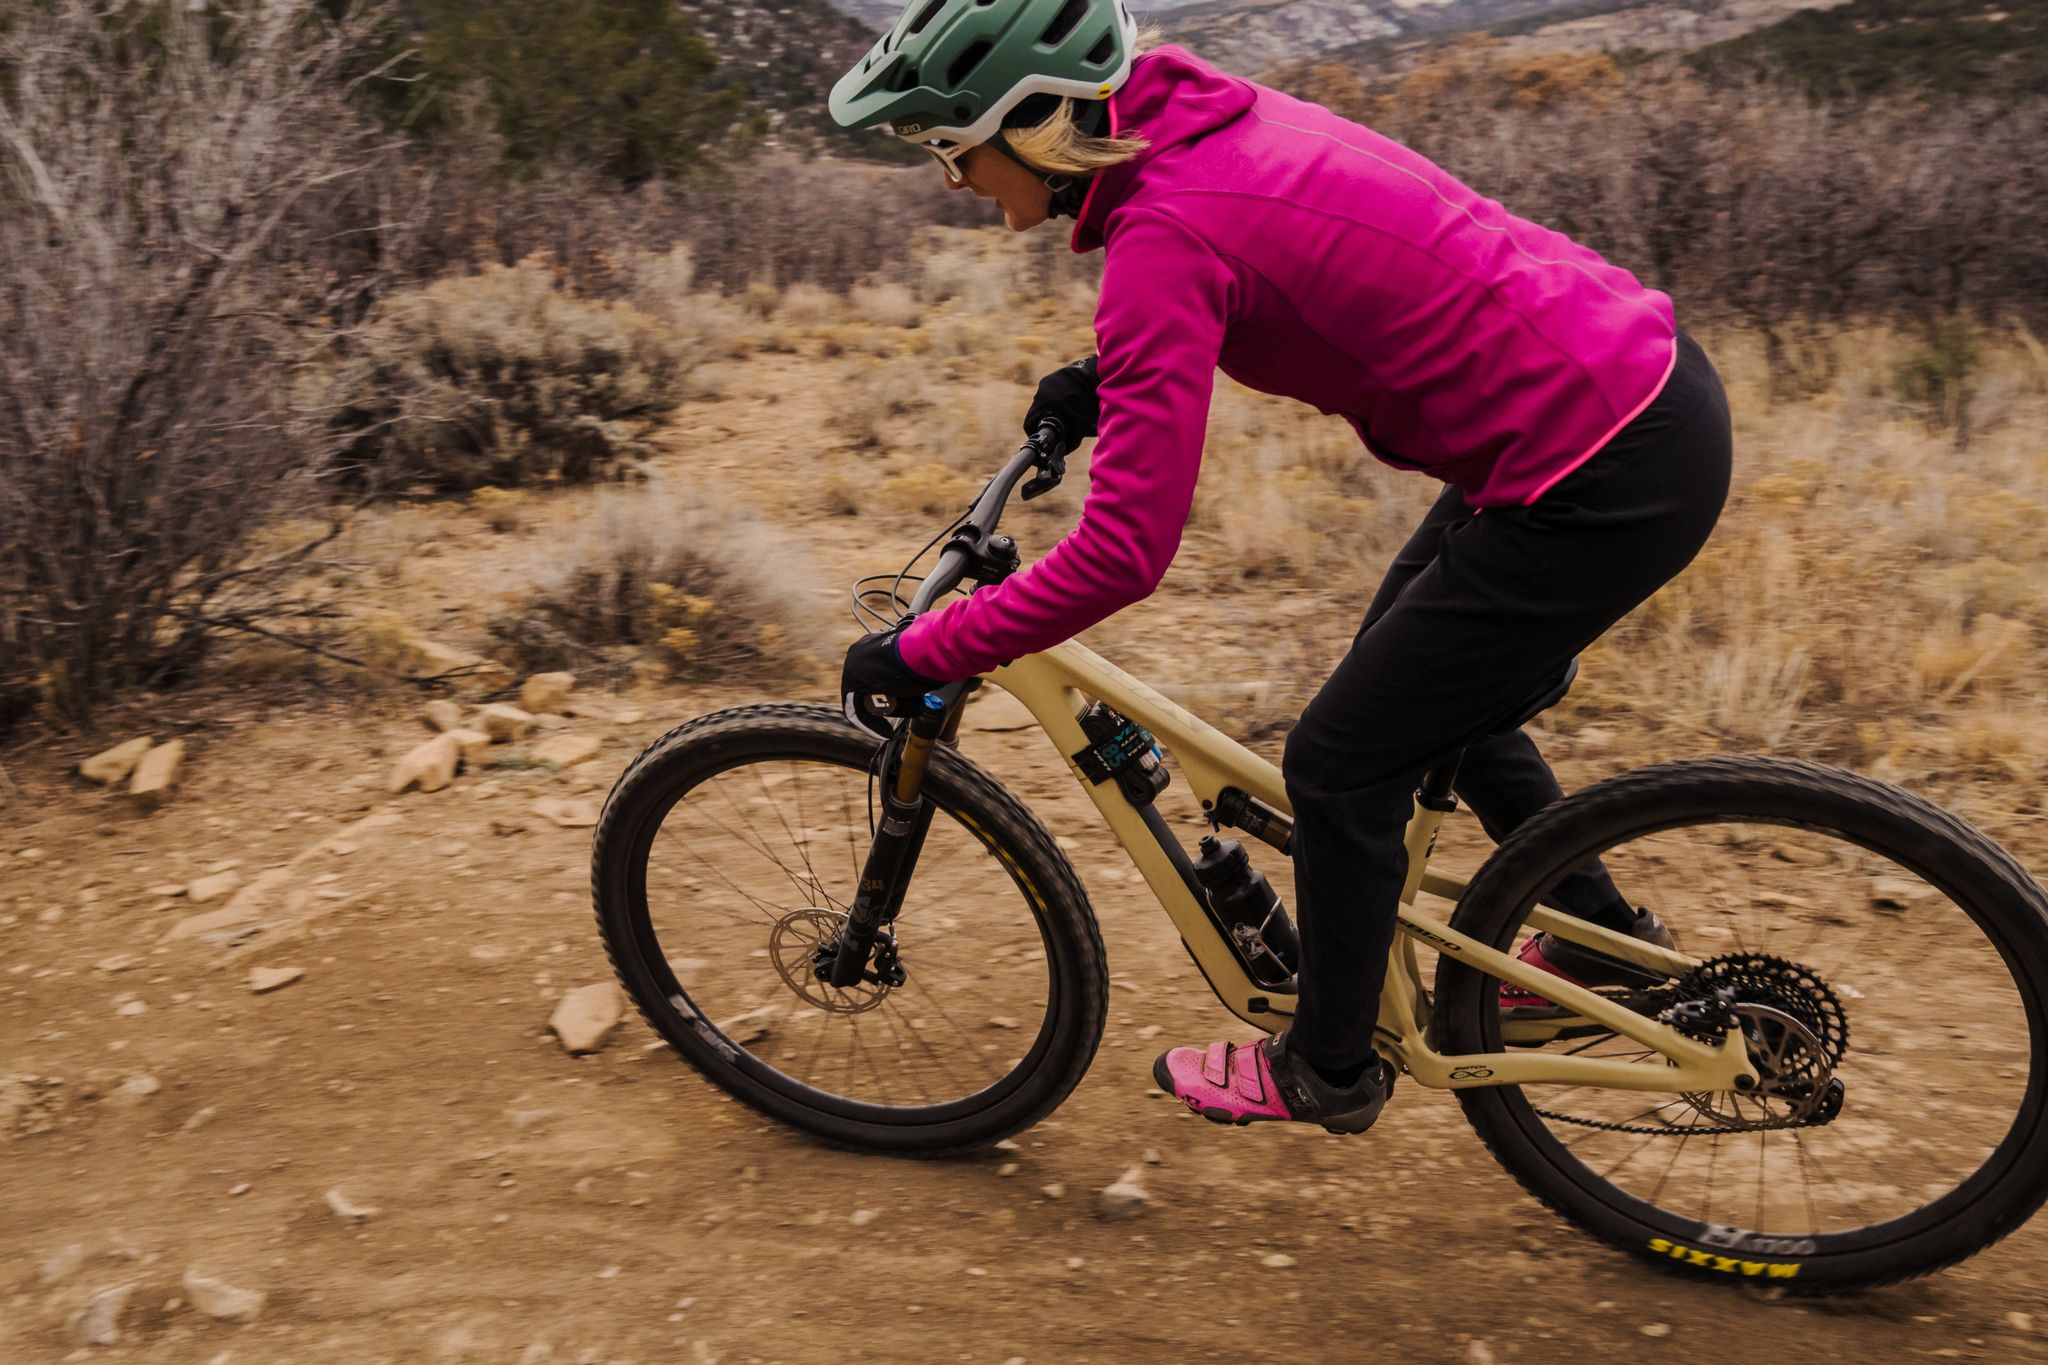 amy colyar on the yeti sb 120 in durango, co in december 2022 for best bikes